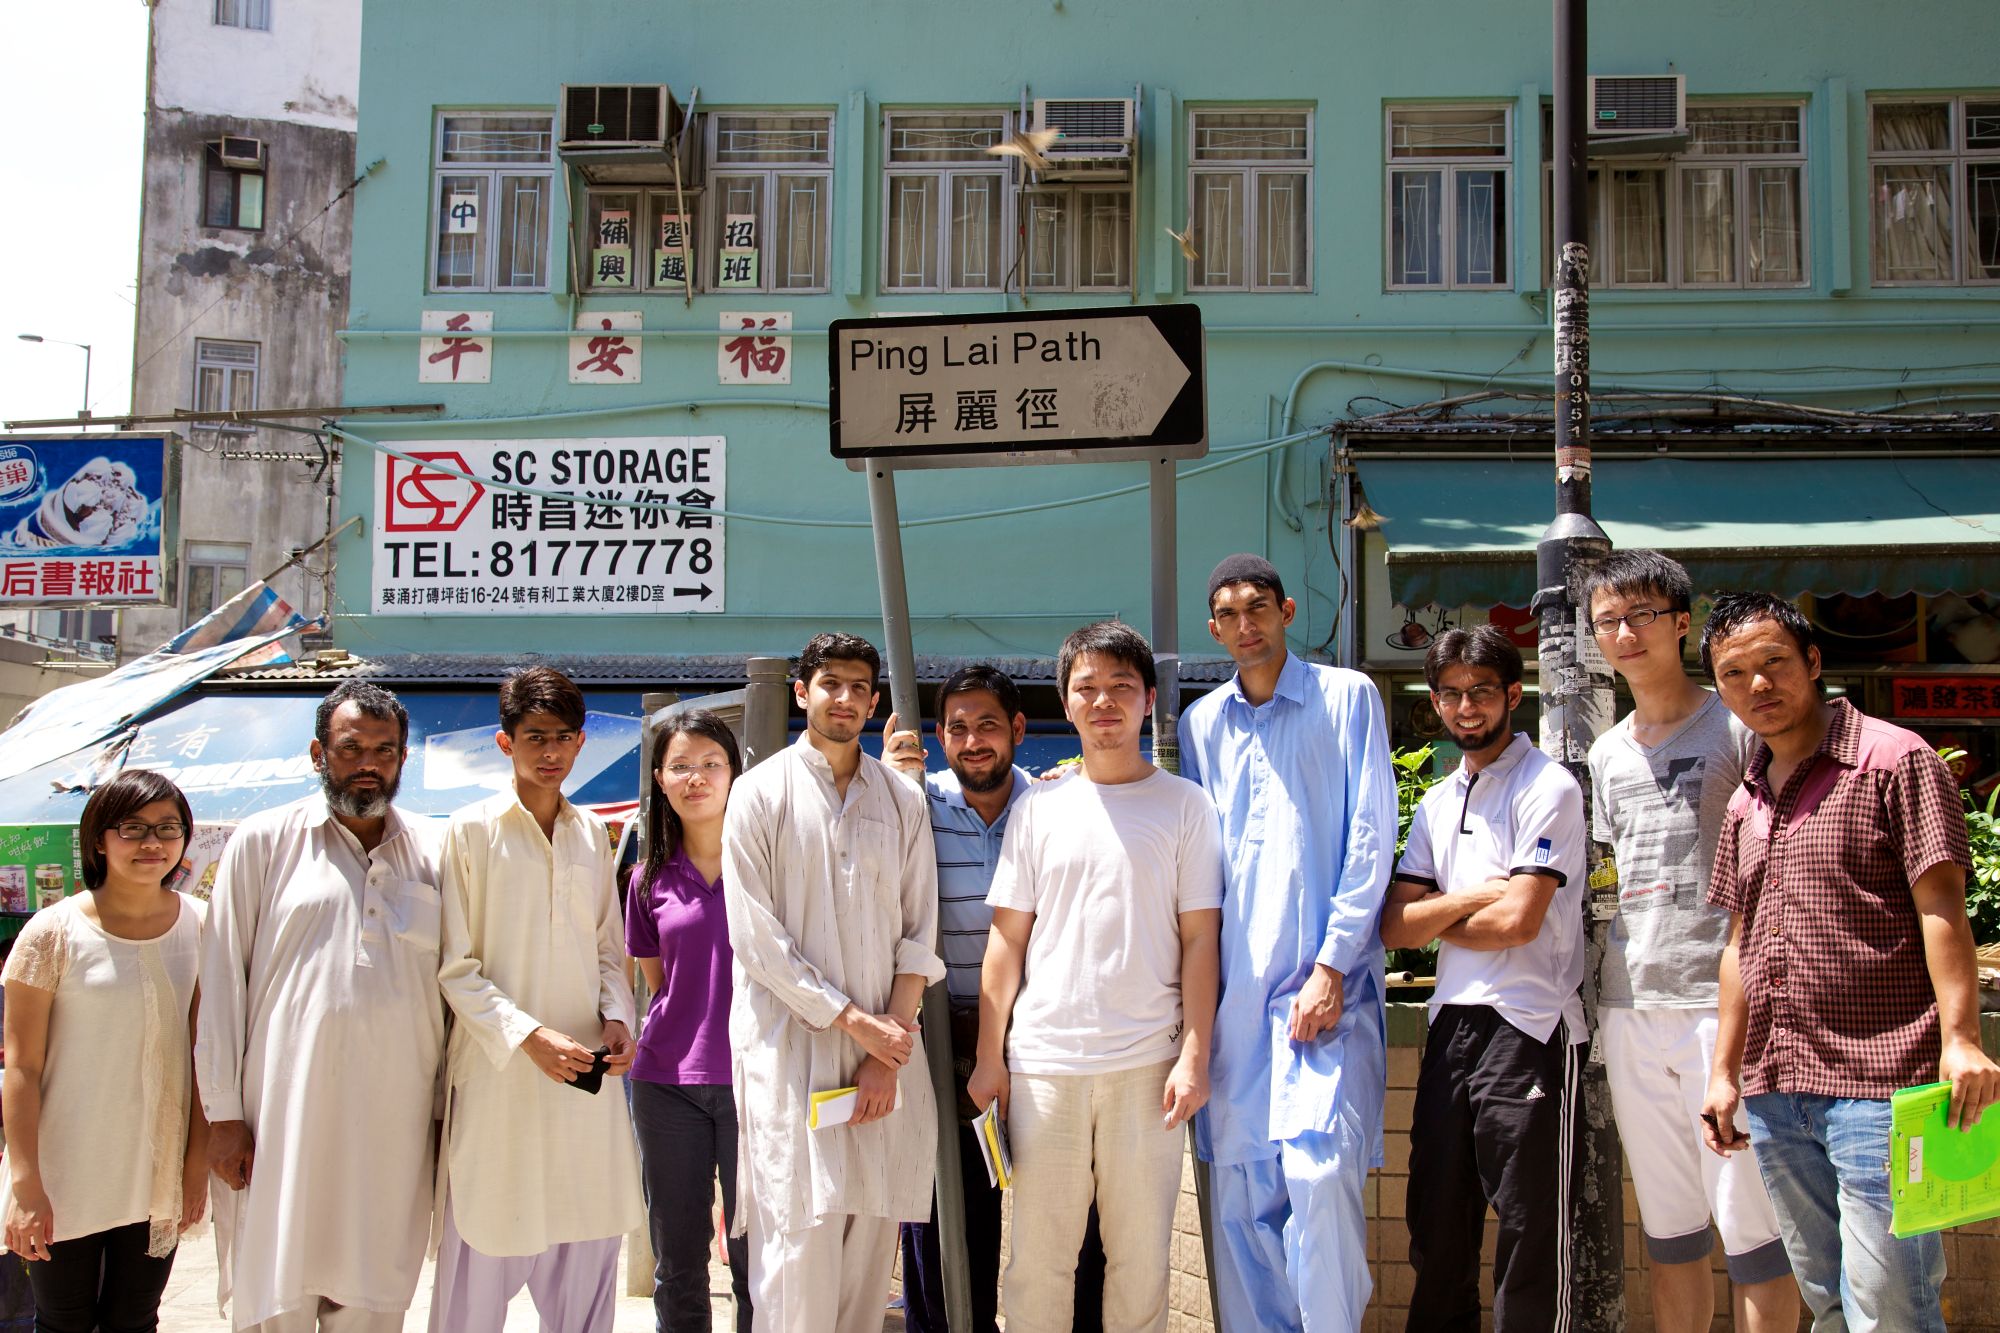 Since the 1960s, Ping Lai Path in Kwai Chung has been a community jointly built by the local Chinese and South Asians. The project of “Our Community of Love & Mutuality” aims at preserving and boasting the uniqueness of cultural inclusion of South Asians into the local Chinese community.